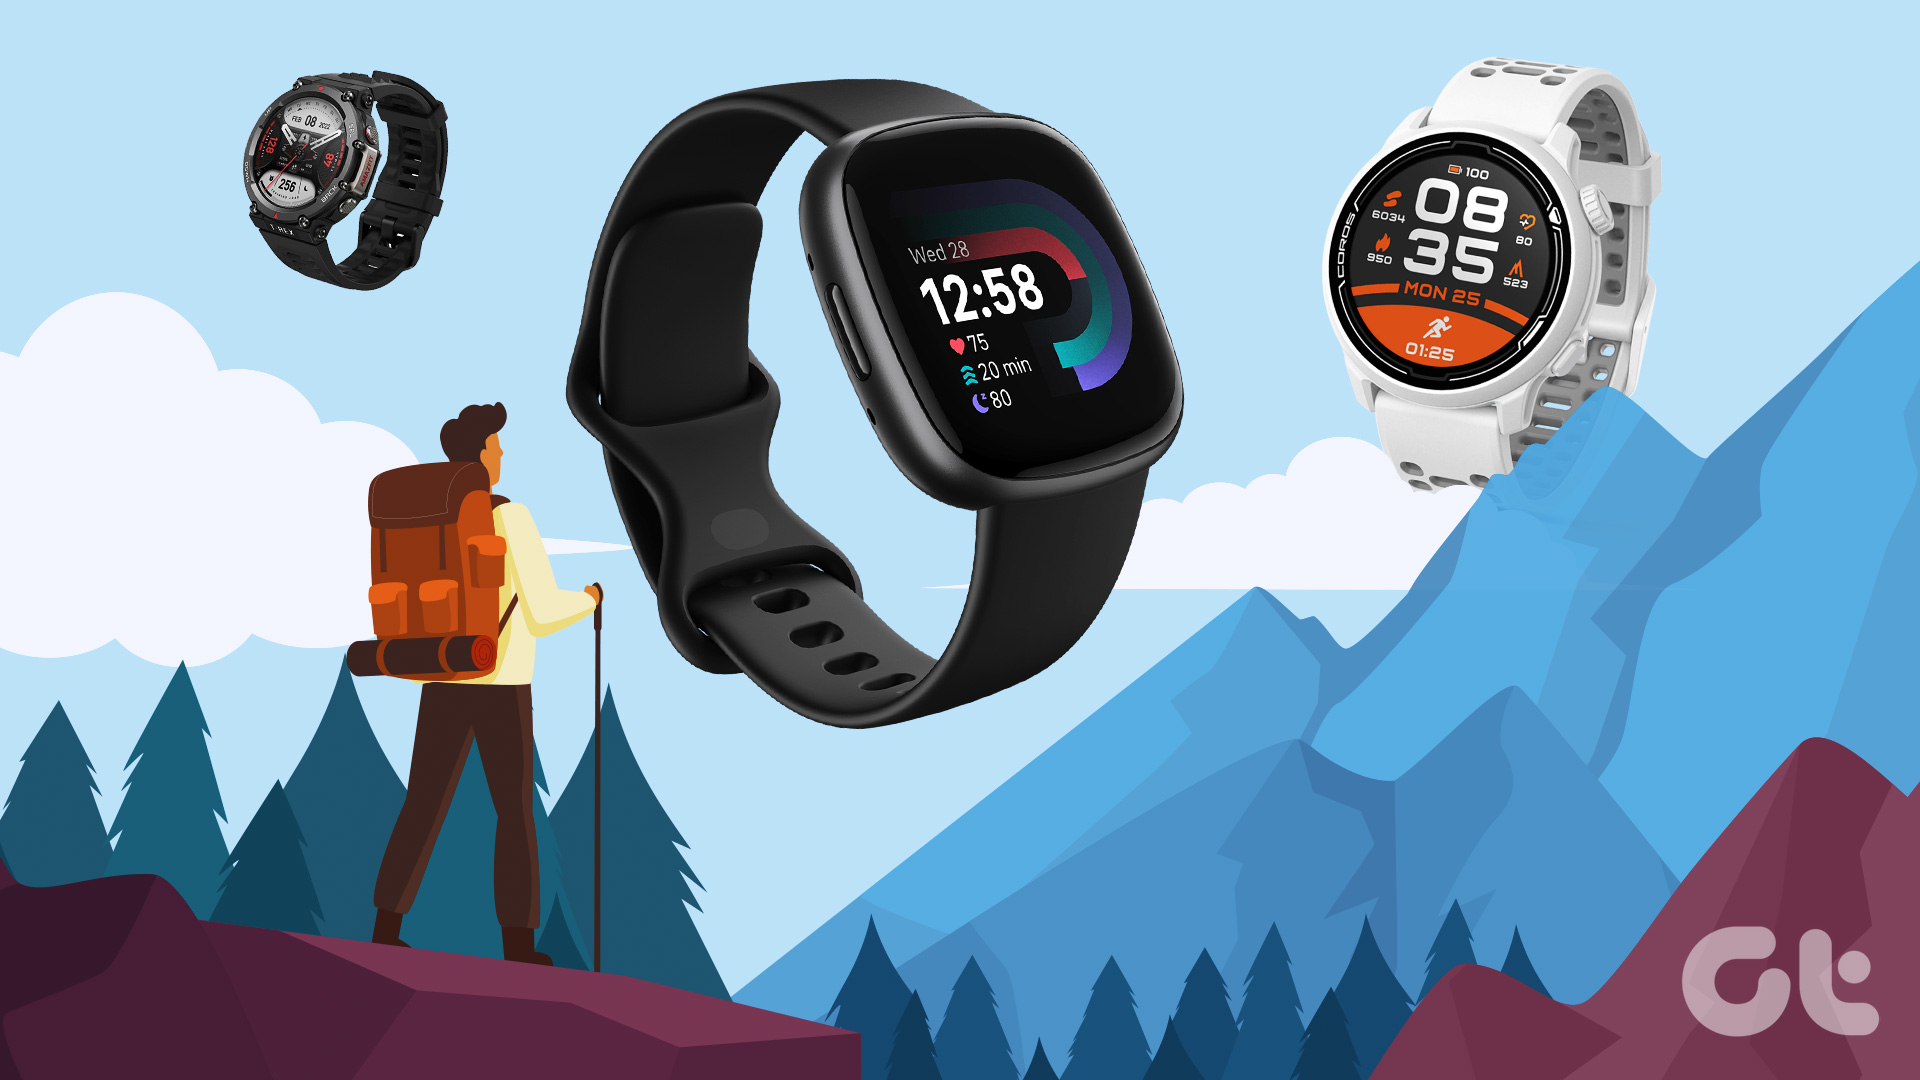 Best Smartwatches With GPS for Hiking and Navigation